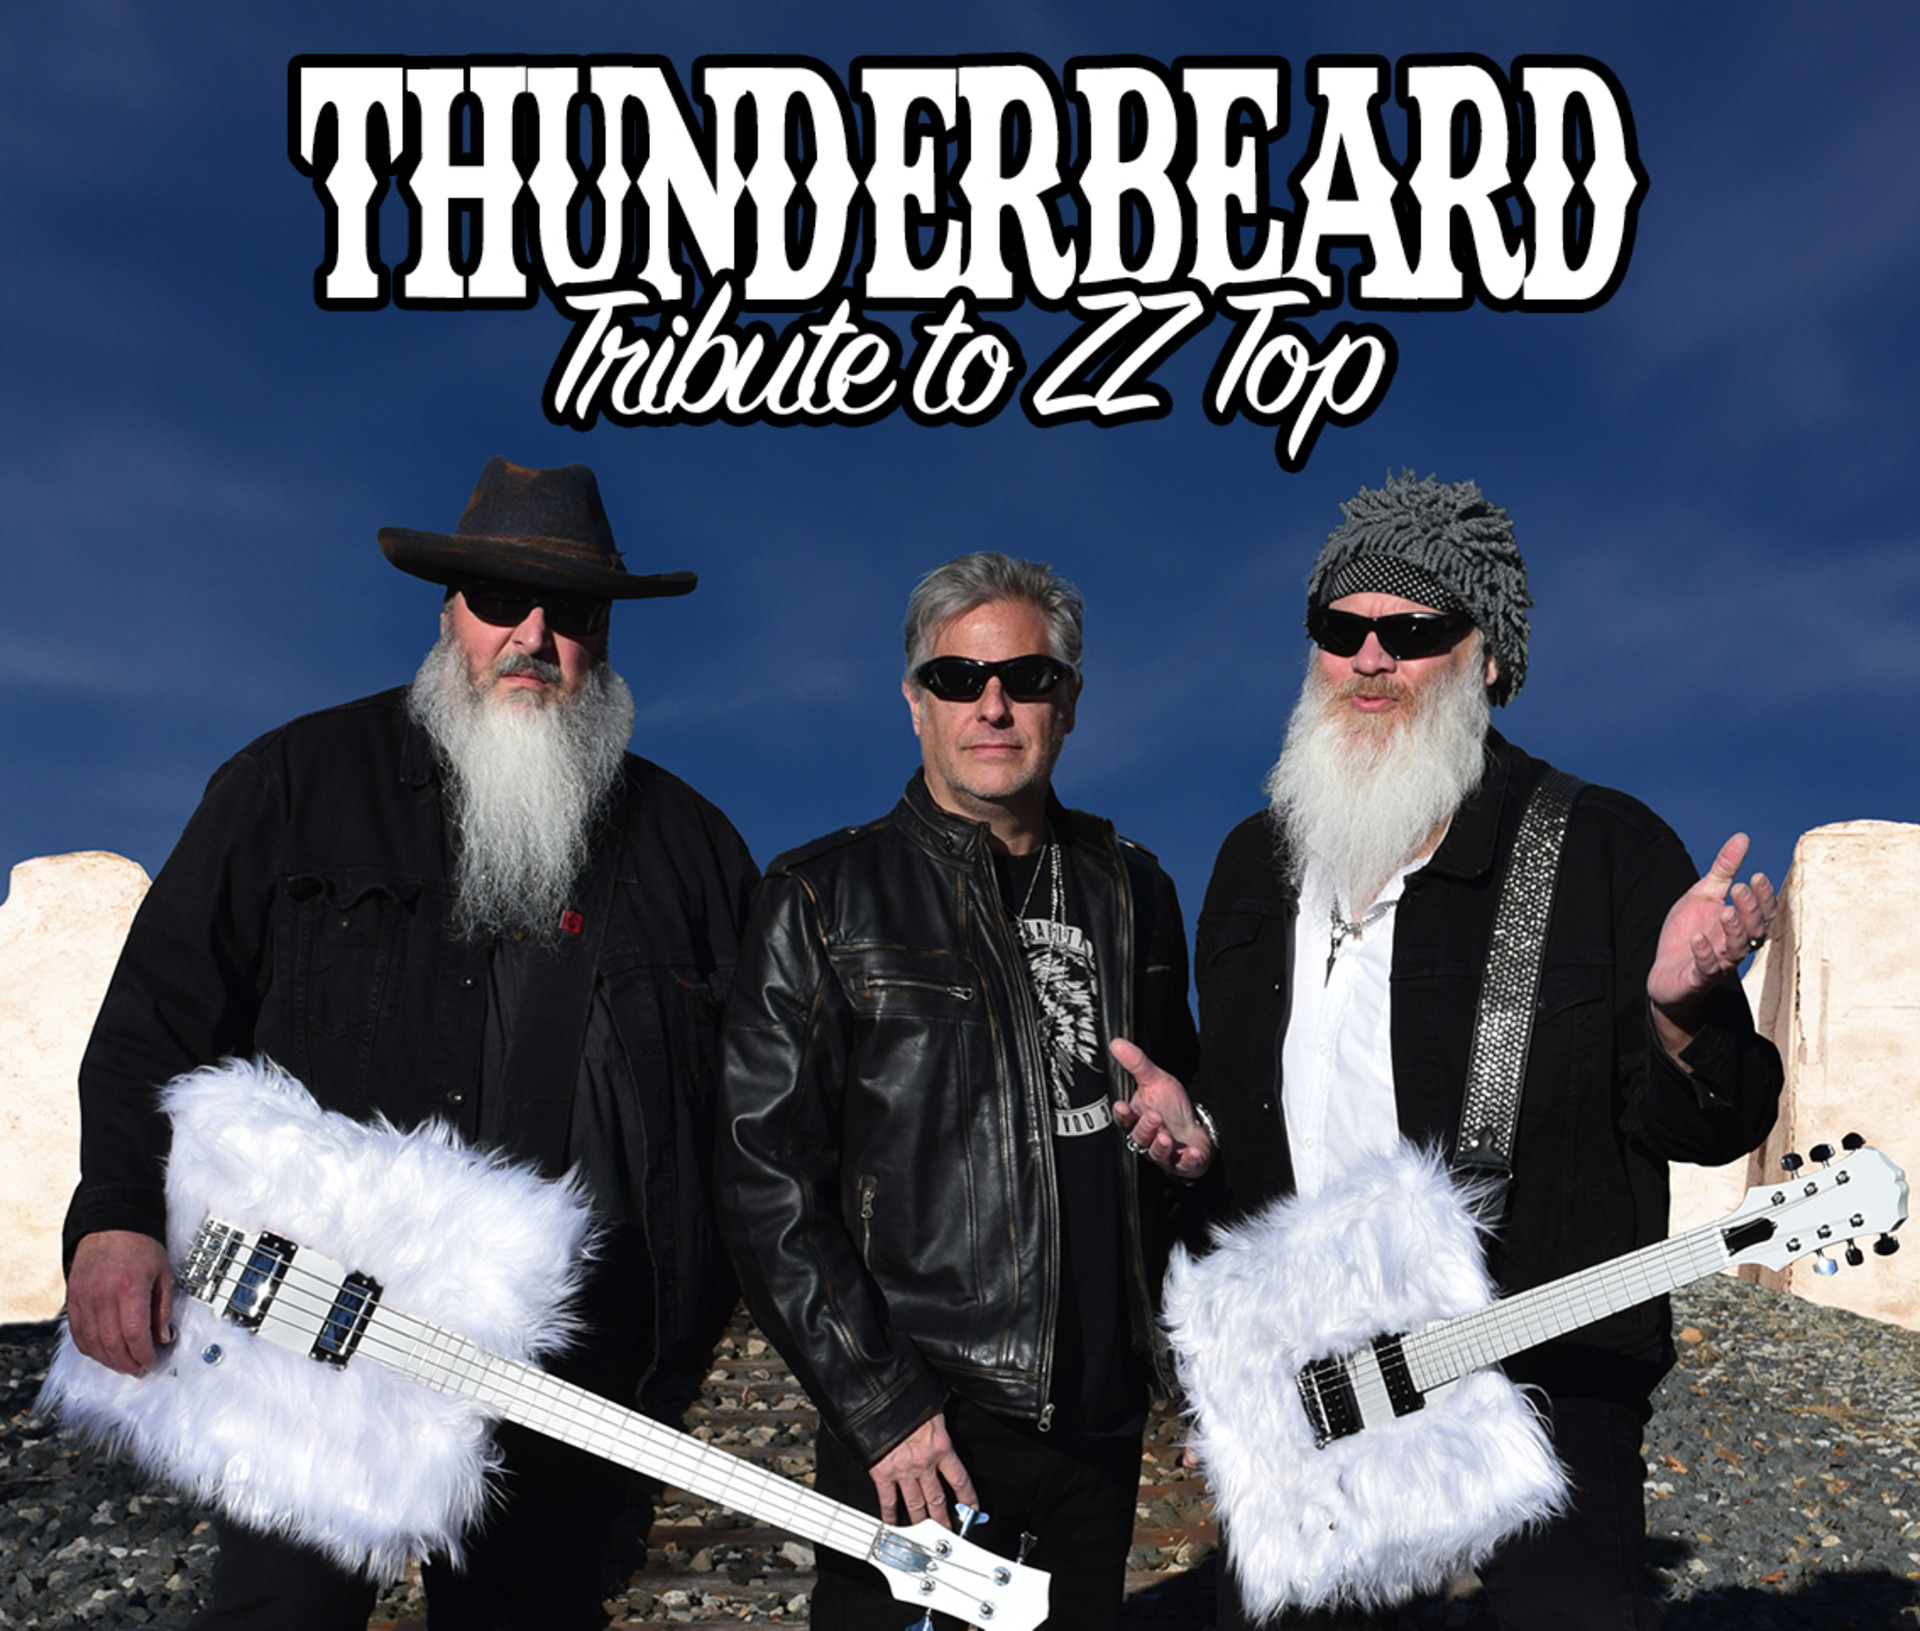 Buy Tickets – THUNDERBEARD - the Ultimate ZZ Top – Lions Lincoln 